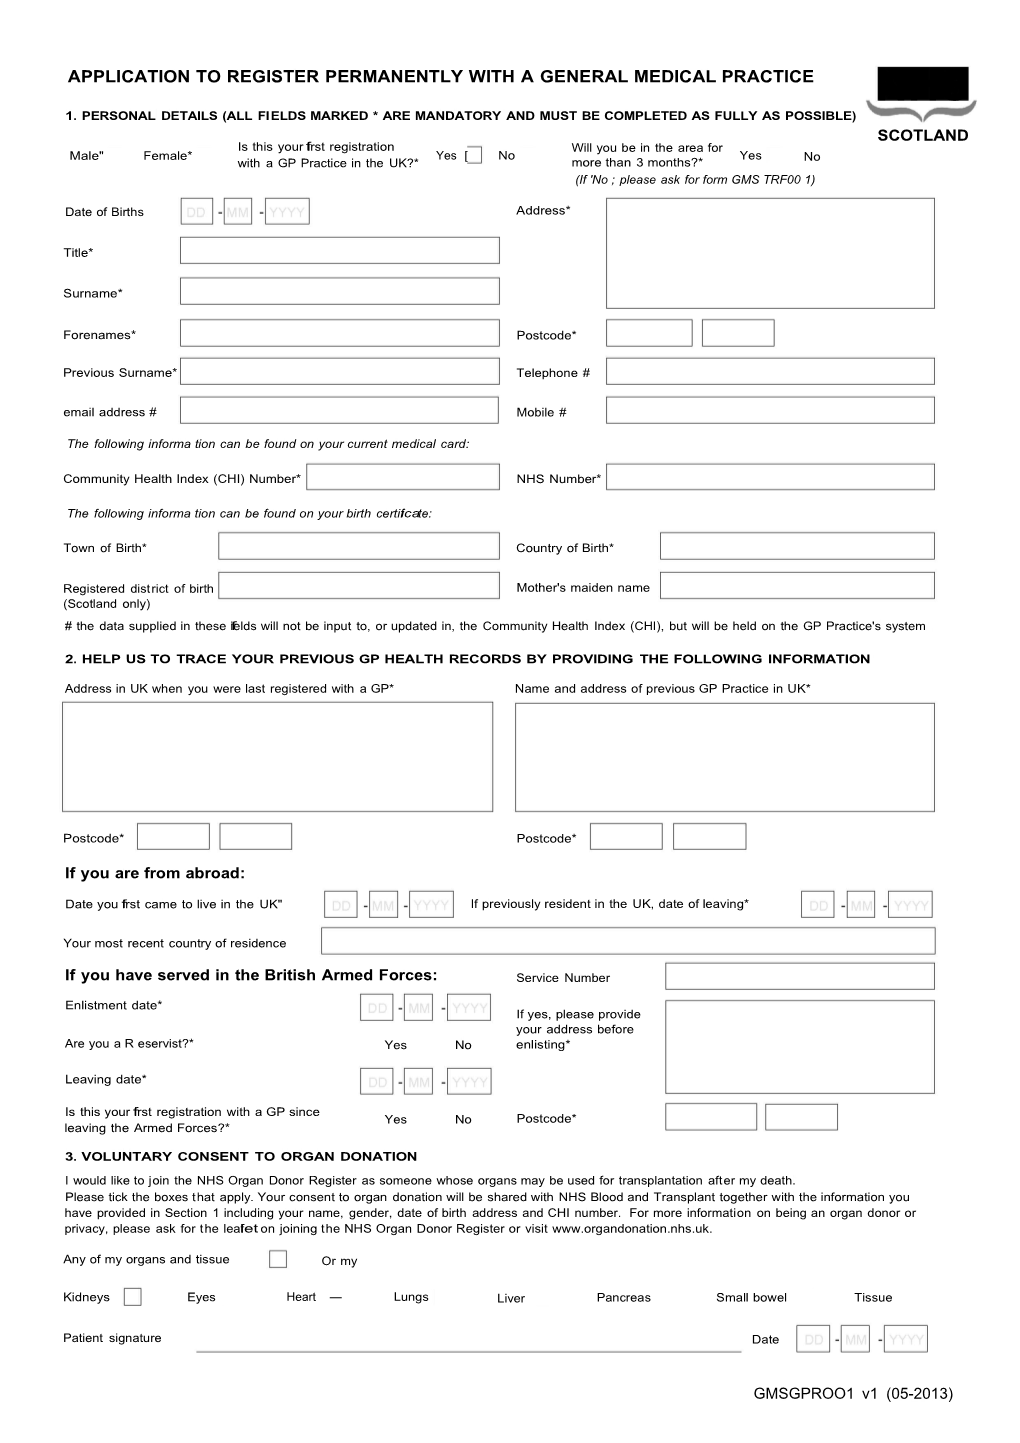 Application to Register Permanently with a General Medical Practice